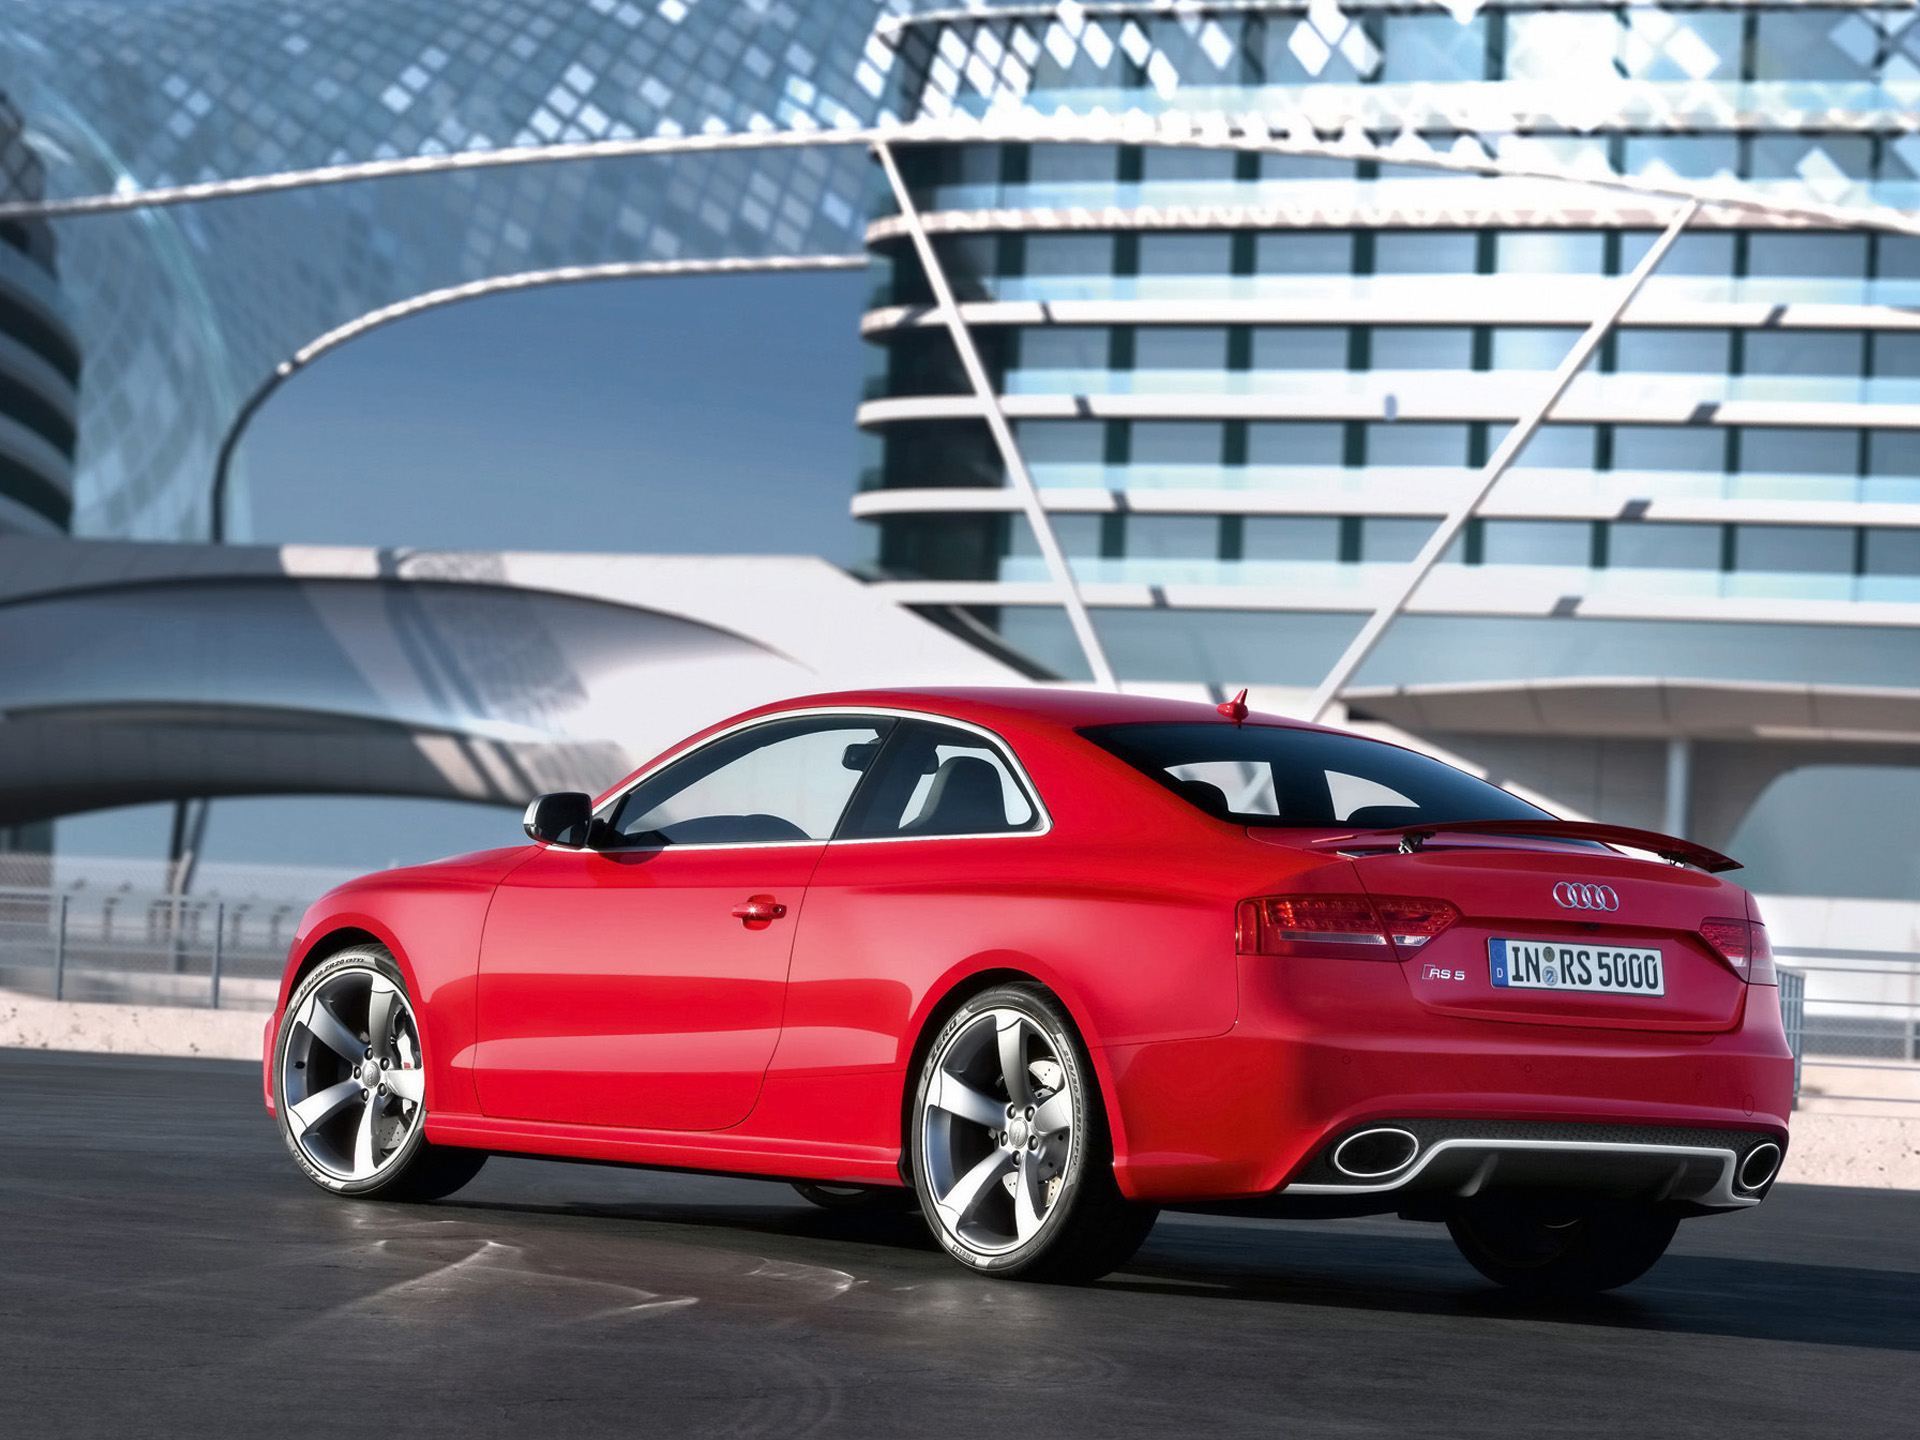 Audi RS5 HD Wallpaper | Background Image | 1920x1440 | ID:477692